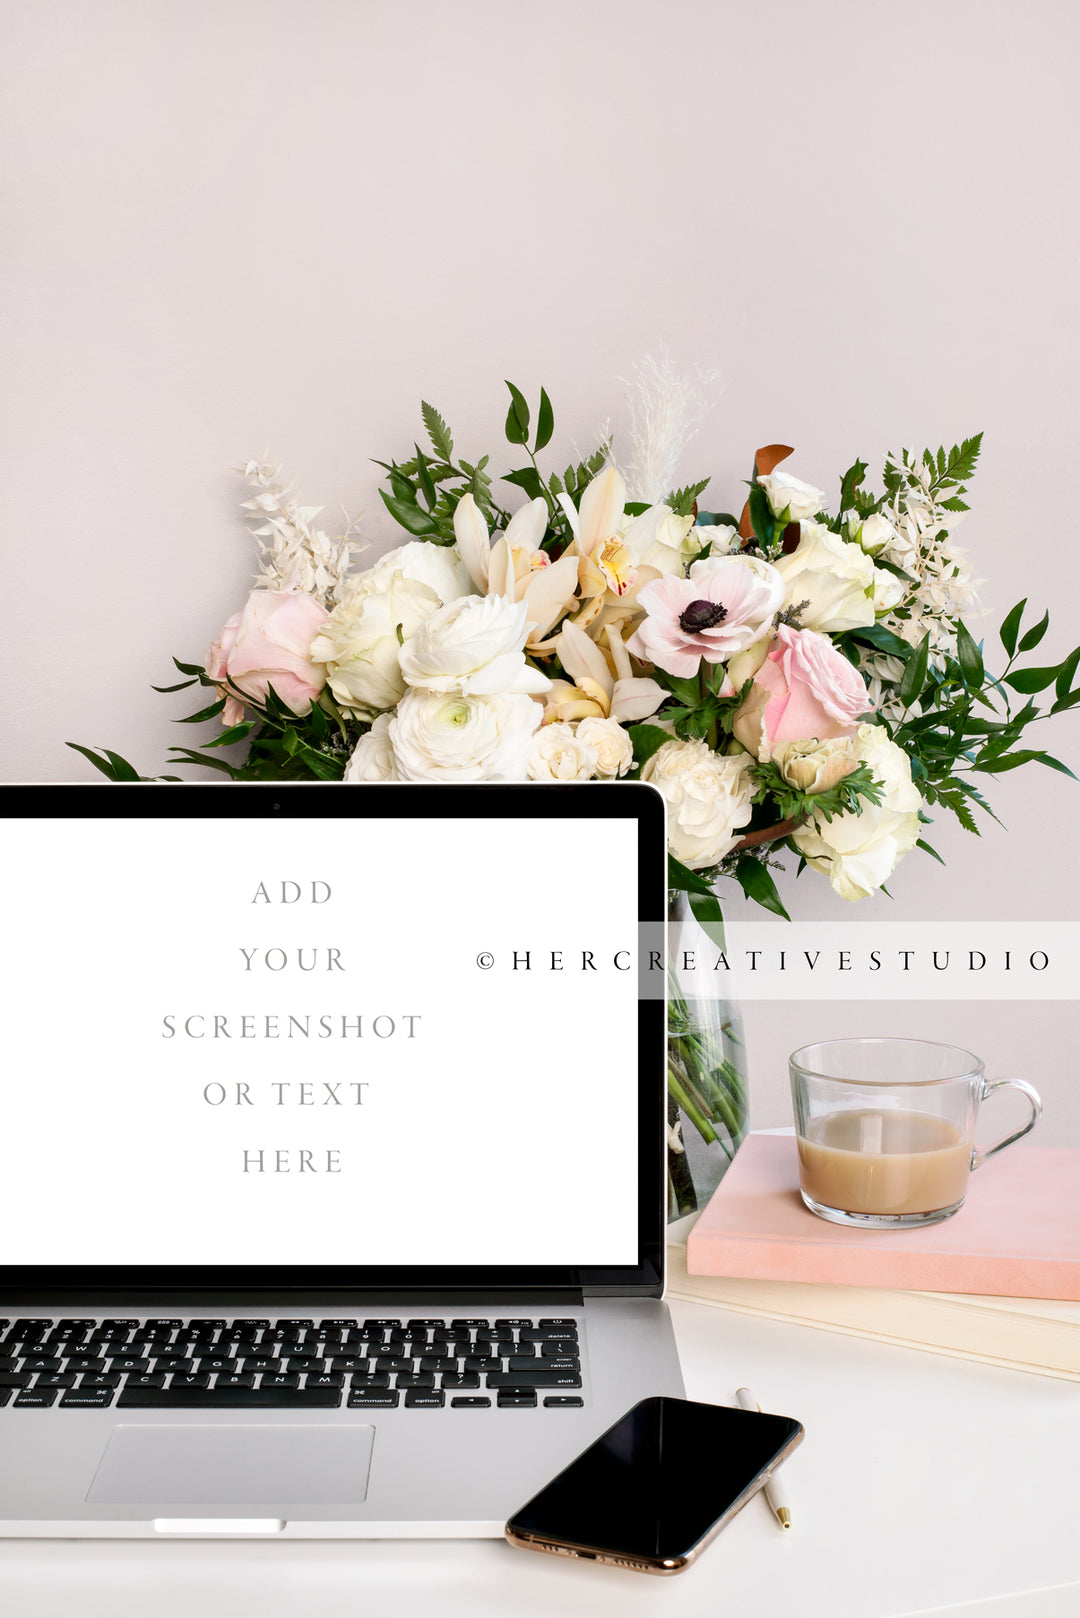 Laptop, Coffee & Flowers on Pretty Workspace, Styled Stock Image